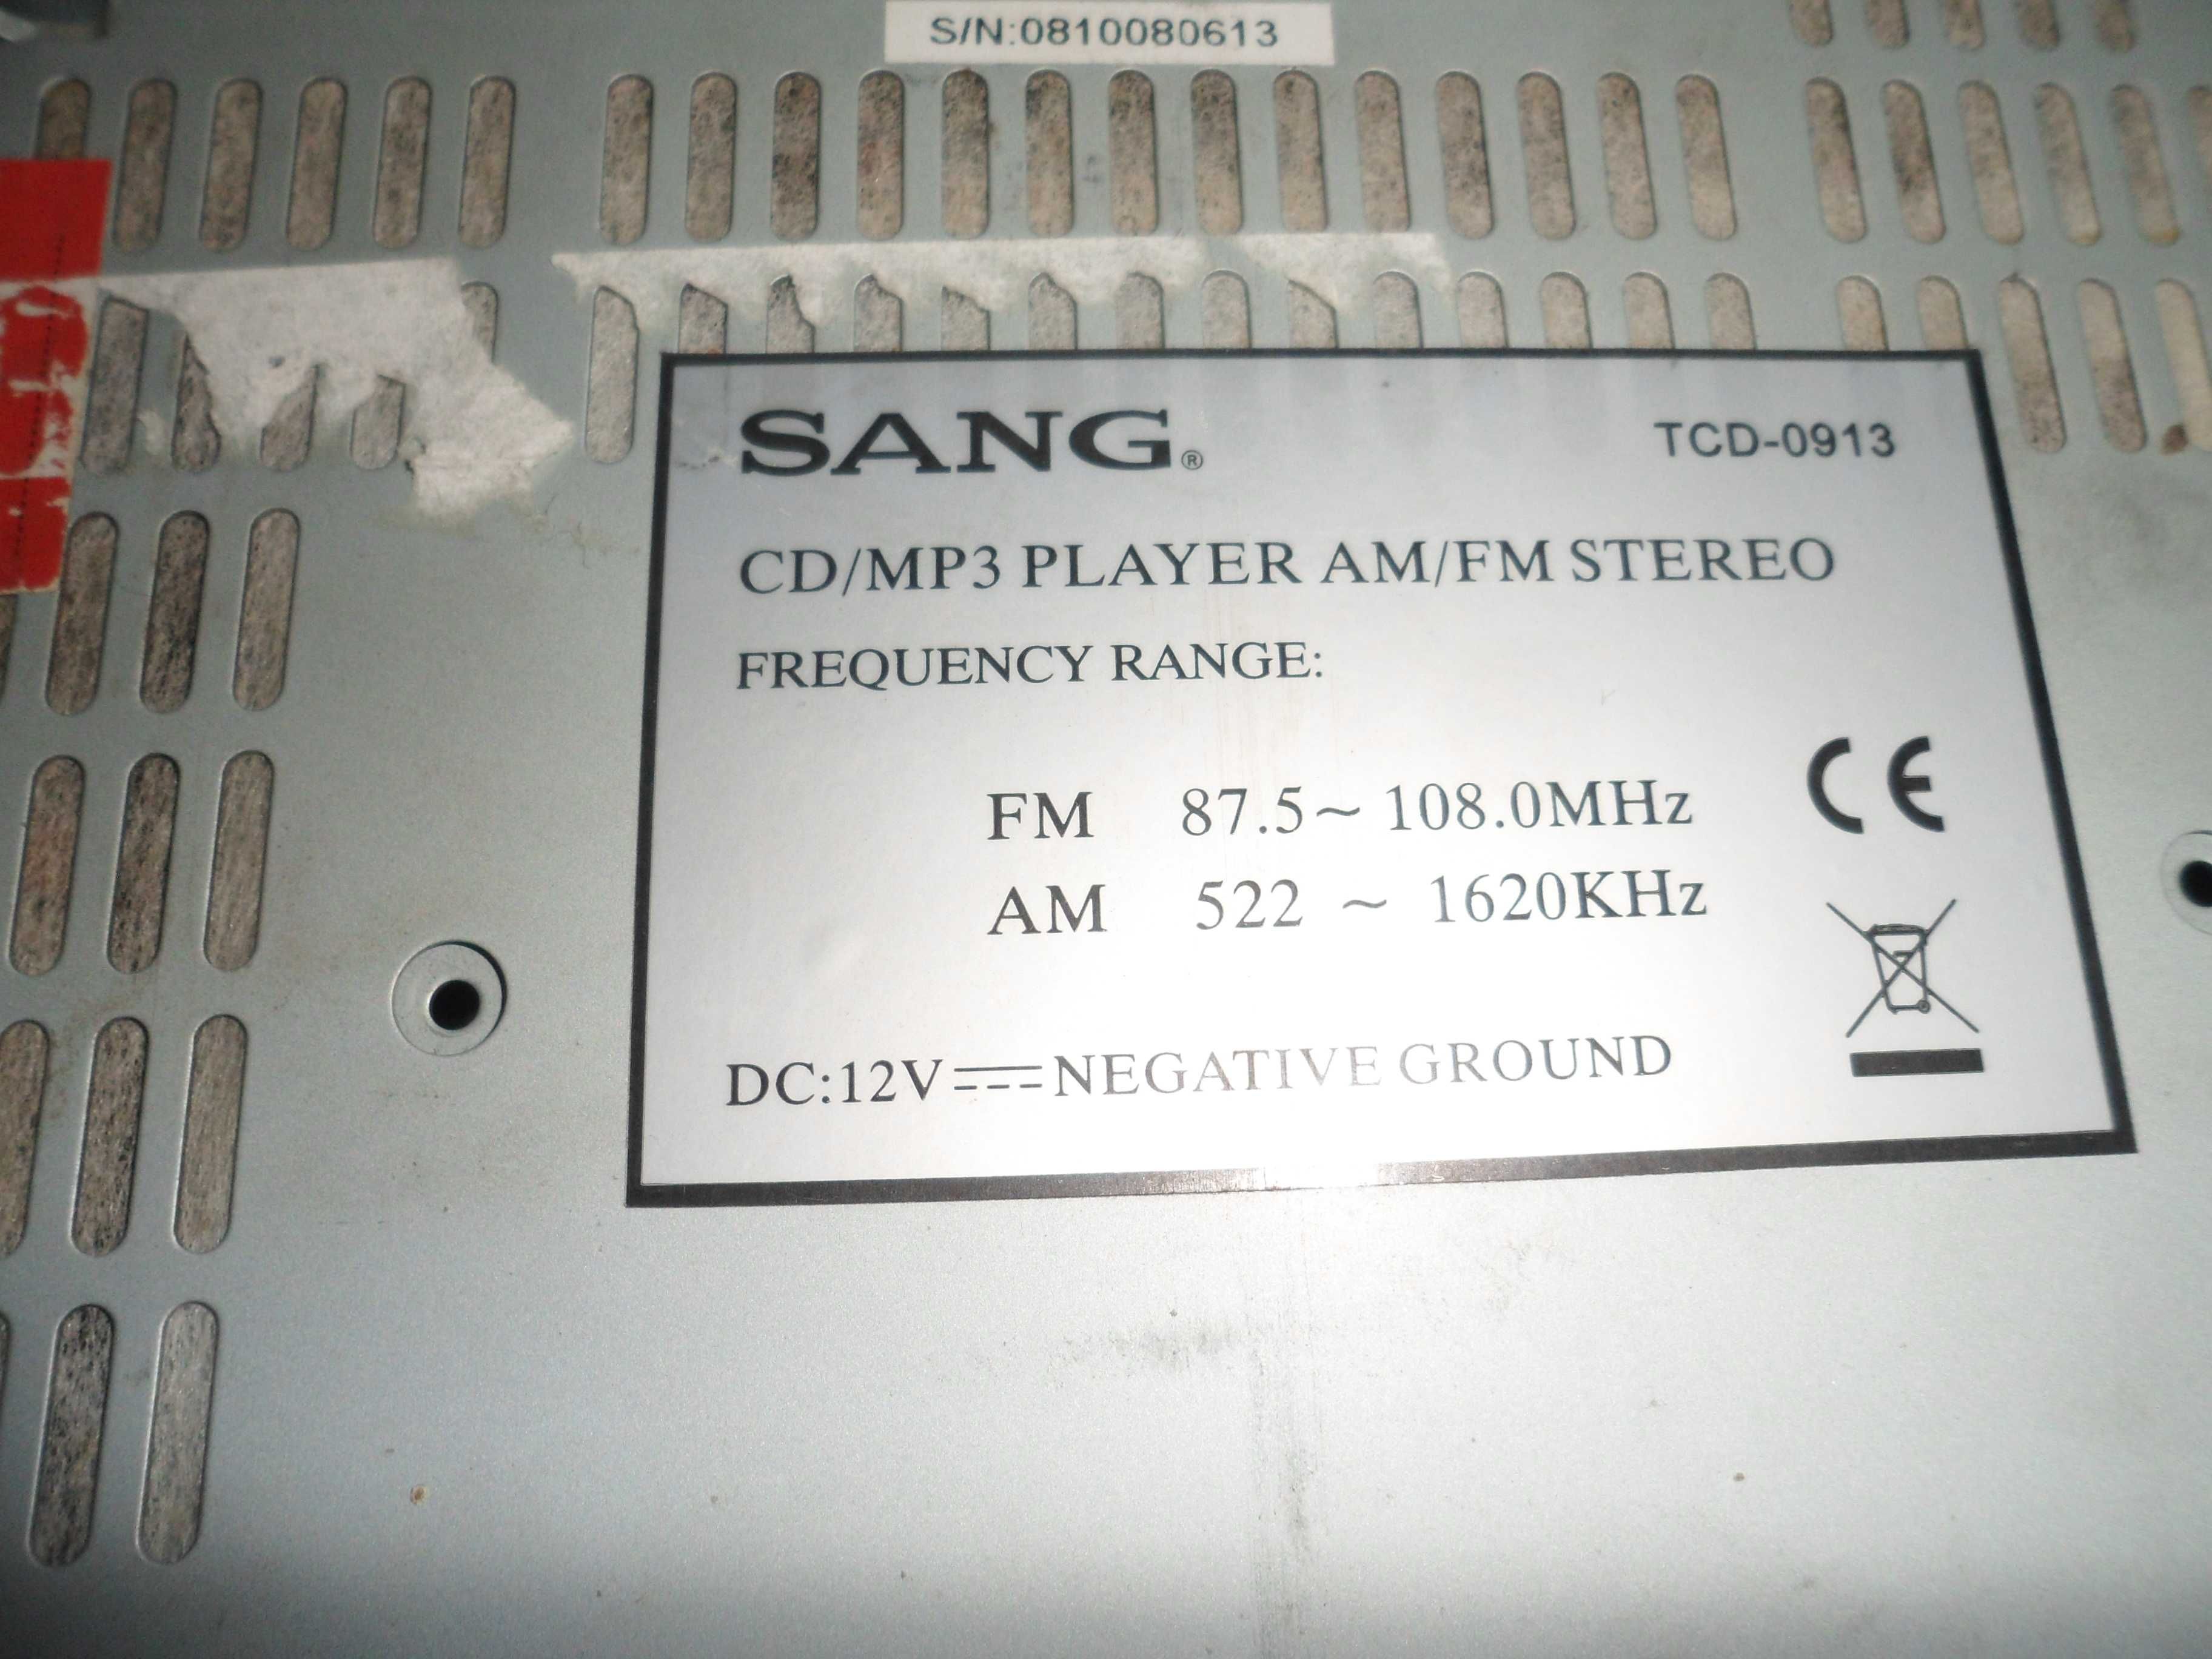 CD / MP3 Player AM/FM Stereo - SANG